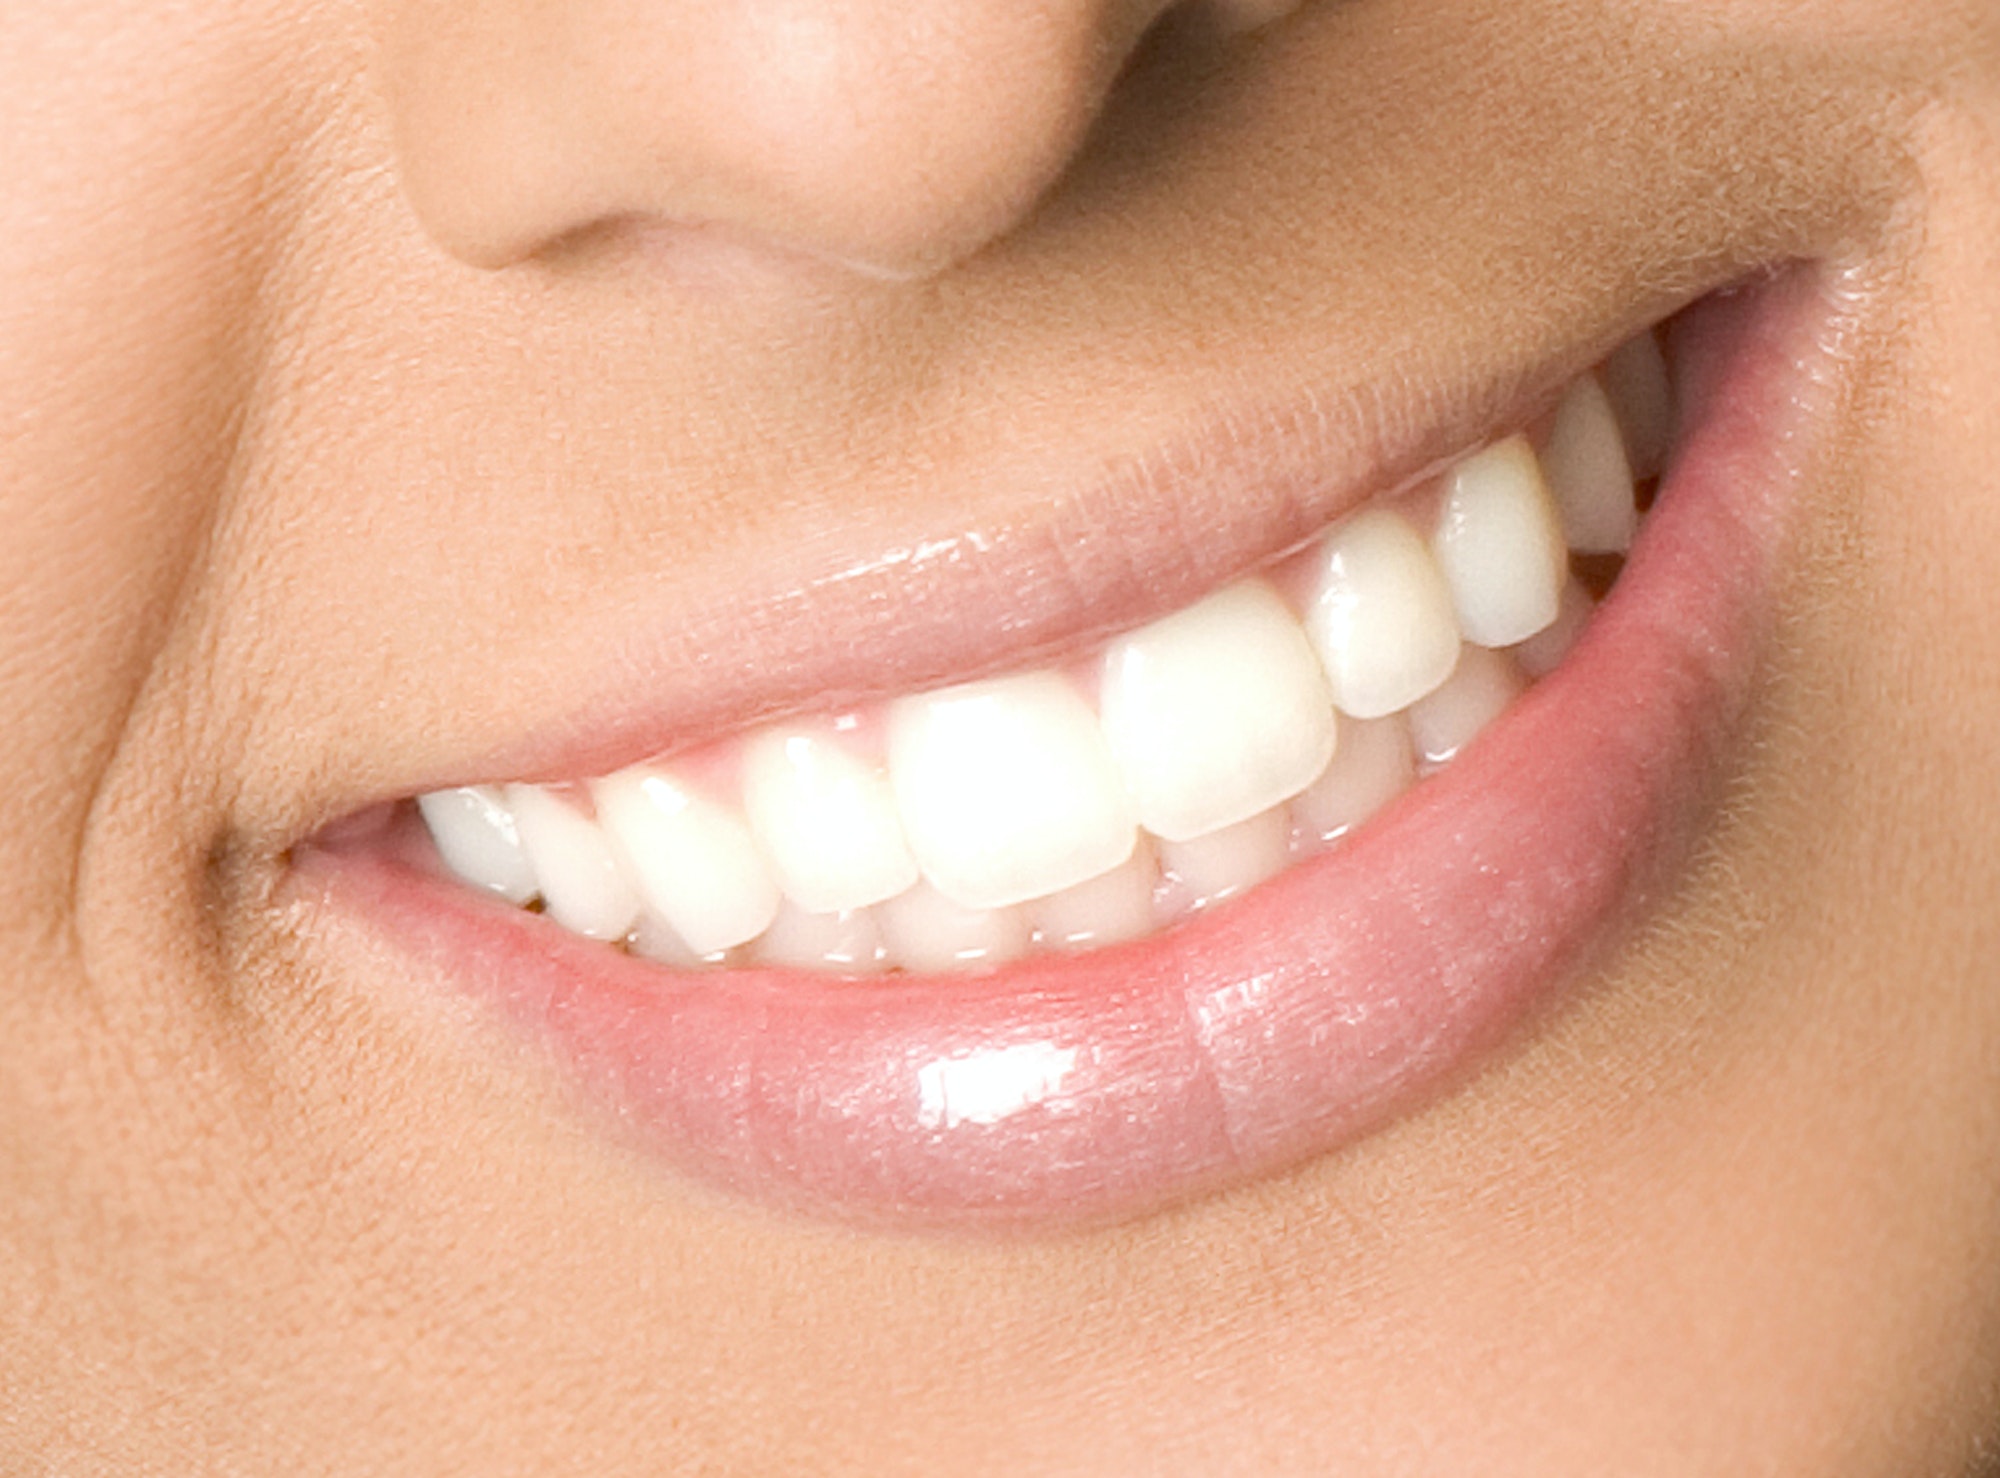 Healthy woman teeth and smile close up